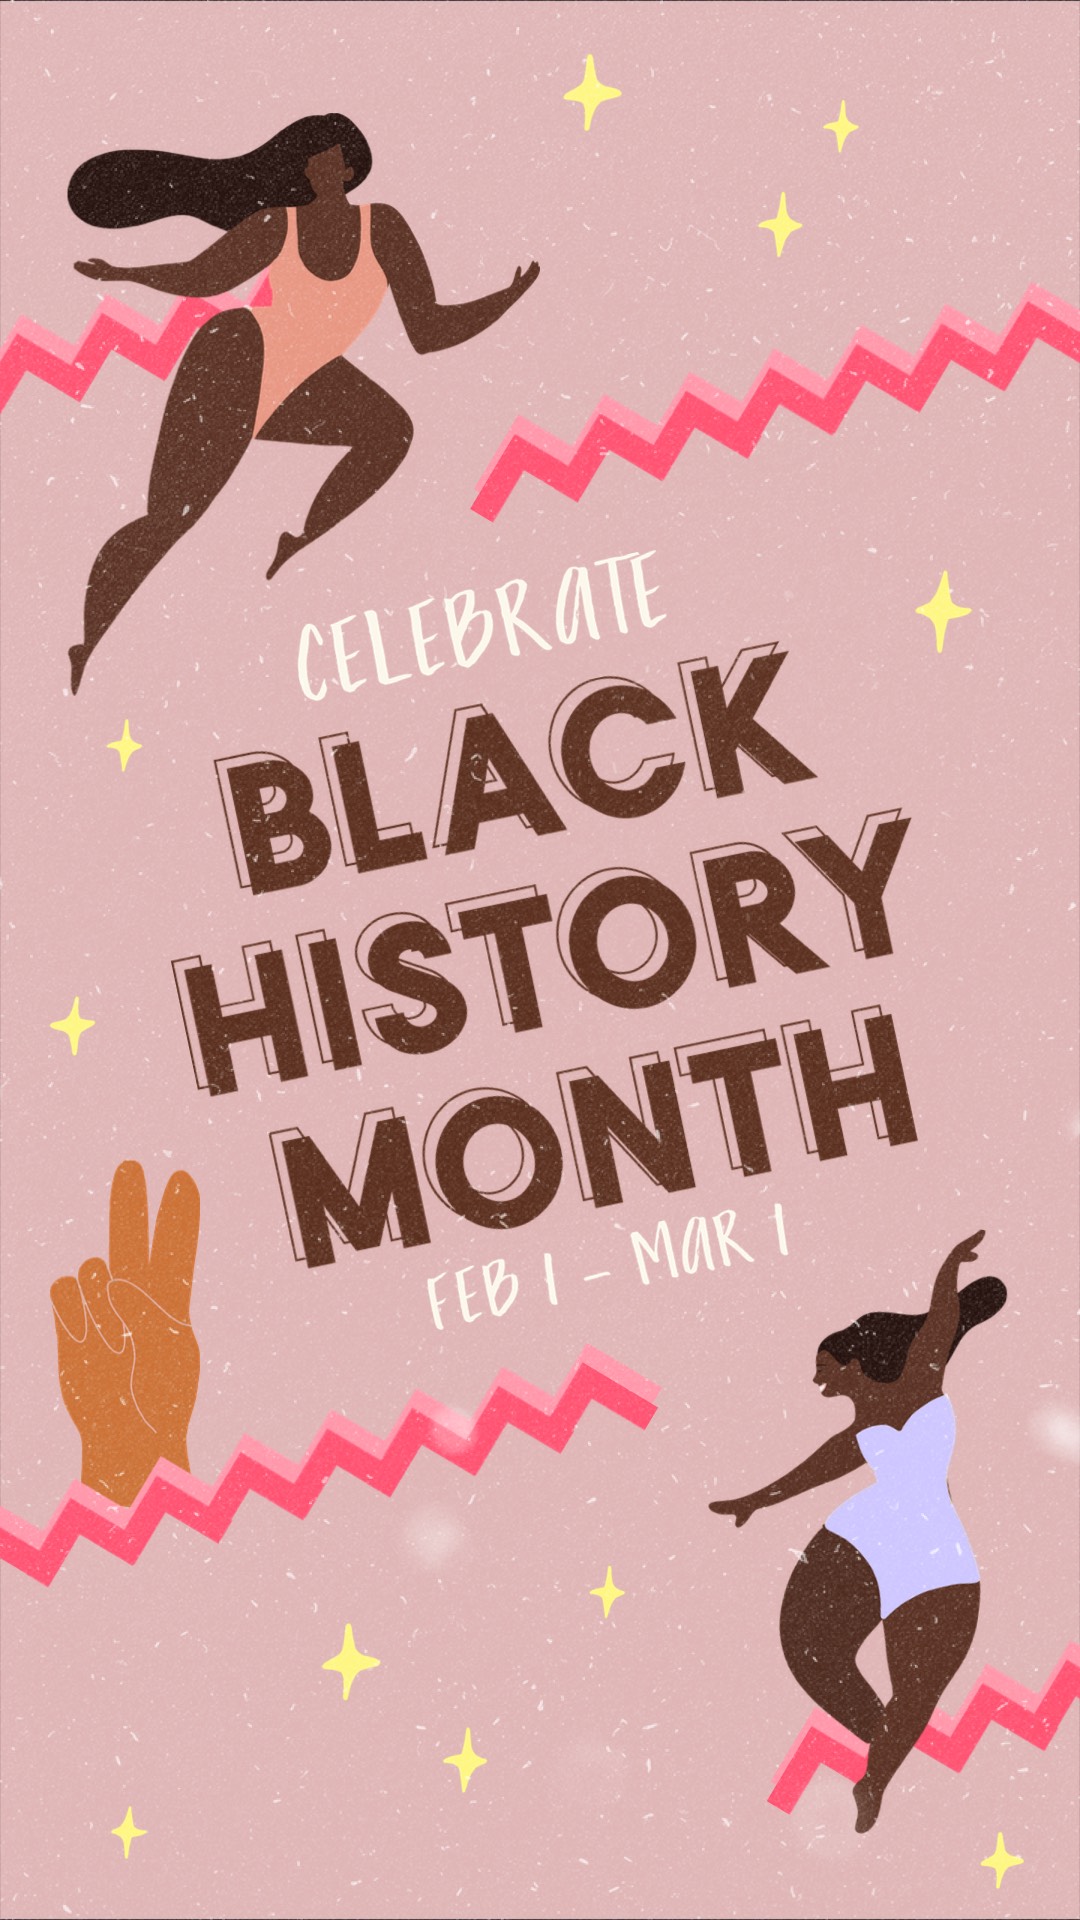 Black history month illustrations instagram story template 